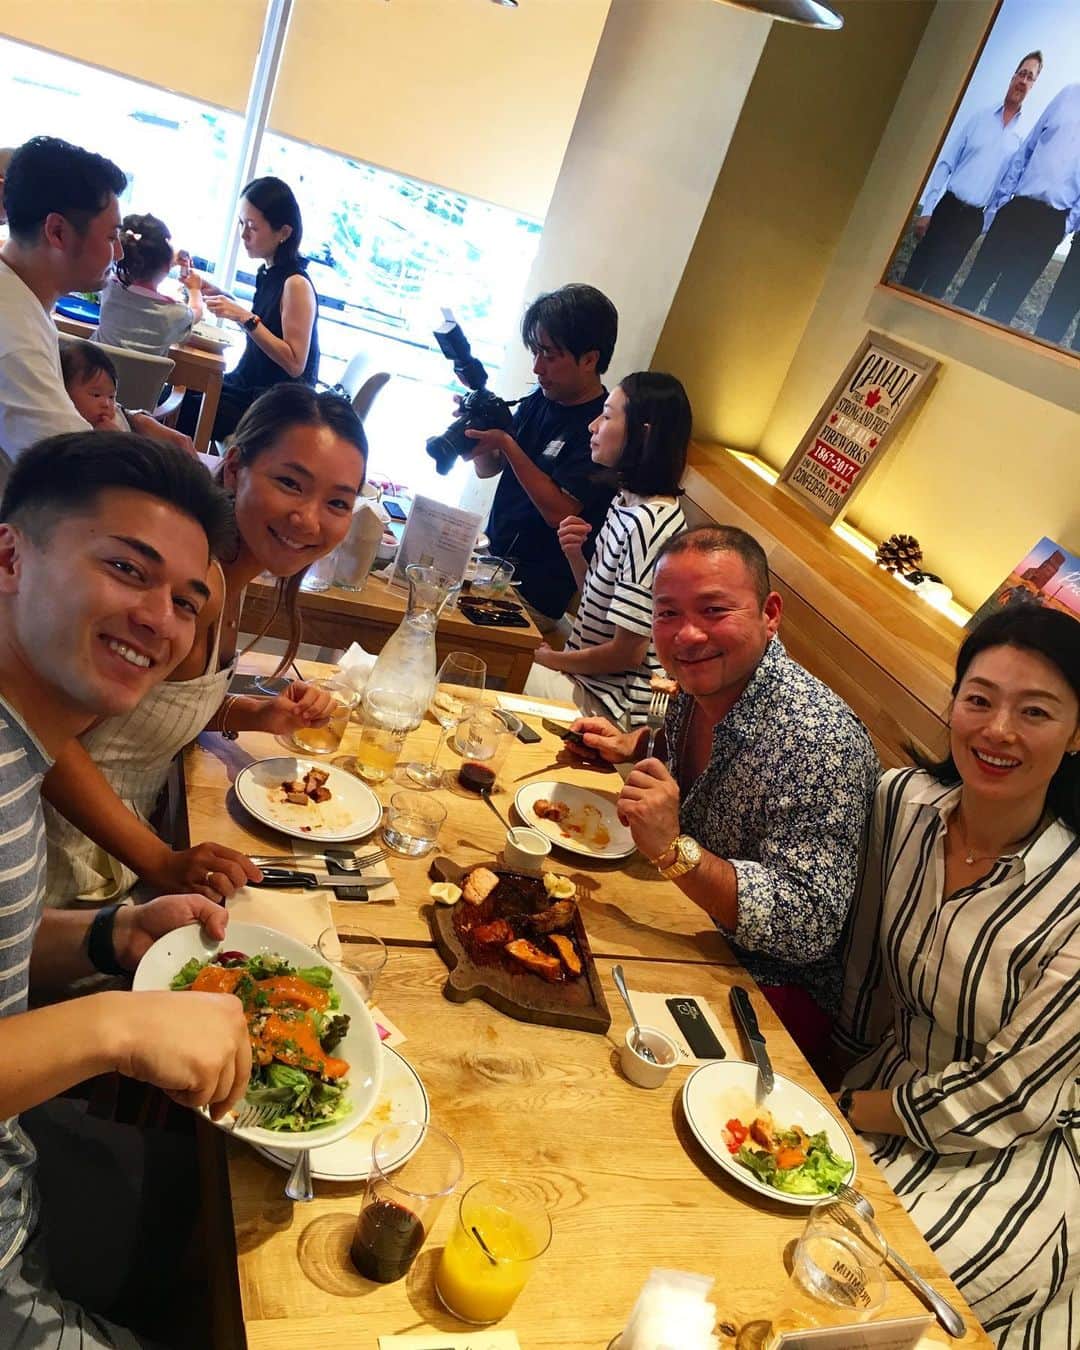 HyLifeporkTABLE代官山さんのインスタグラム写真 - (HyLifeporkTABLE代官山Instagram)「今日、父の日はBBQの日！Father’s day! という事で、ハイライフポークテーブルでBBQイベントを開催しました！満席を頂きまして、大変盛り上がりました！  日本BBQ協会の会長さんがレクチャーして下さり、300グラムのハイライフポークをテラスのグリル台で焼きました。厚めのポークを絶妙な焼き加減で。皆さん、素晴らしい焼き上がり！お父さん方、家族からもカッコ良い！頂きました！  Having father’s day event at HyLife pork TABLE! Fathers are grilling 300g porks by themselves for their families. With the instructions by Chairman of BBQ association, they enjoyed and cooked thick cut porks with perfect grilled mark. Love and cool daddy today!  #hylifepork #daikanyama #hylifeporktable #父の日 #父の日bbq #bbq #グリル #テラスでbbq #ステーキ #ポークステーキ #グリルステーキ #肉好きな人と繋がりたい #肉活 #お肉大好き #代官山」6月16日 16時40分 - hylifepork